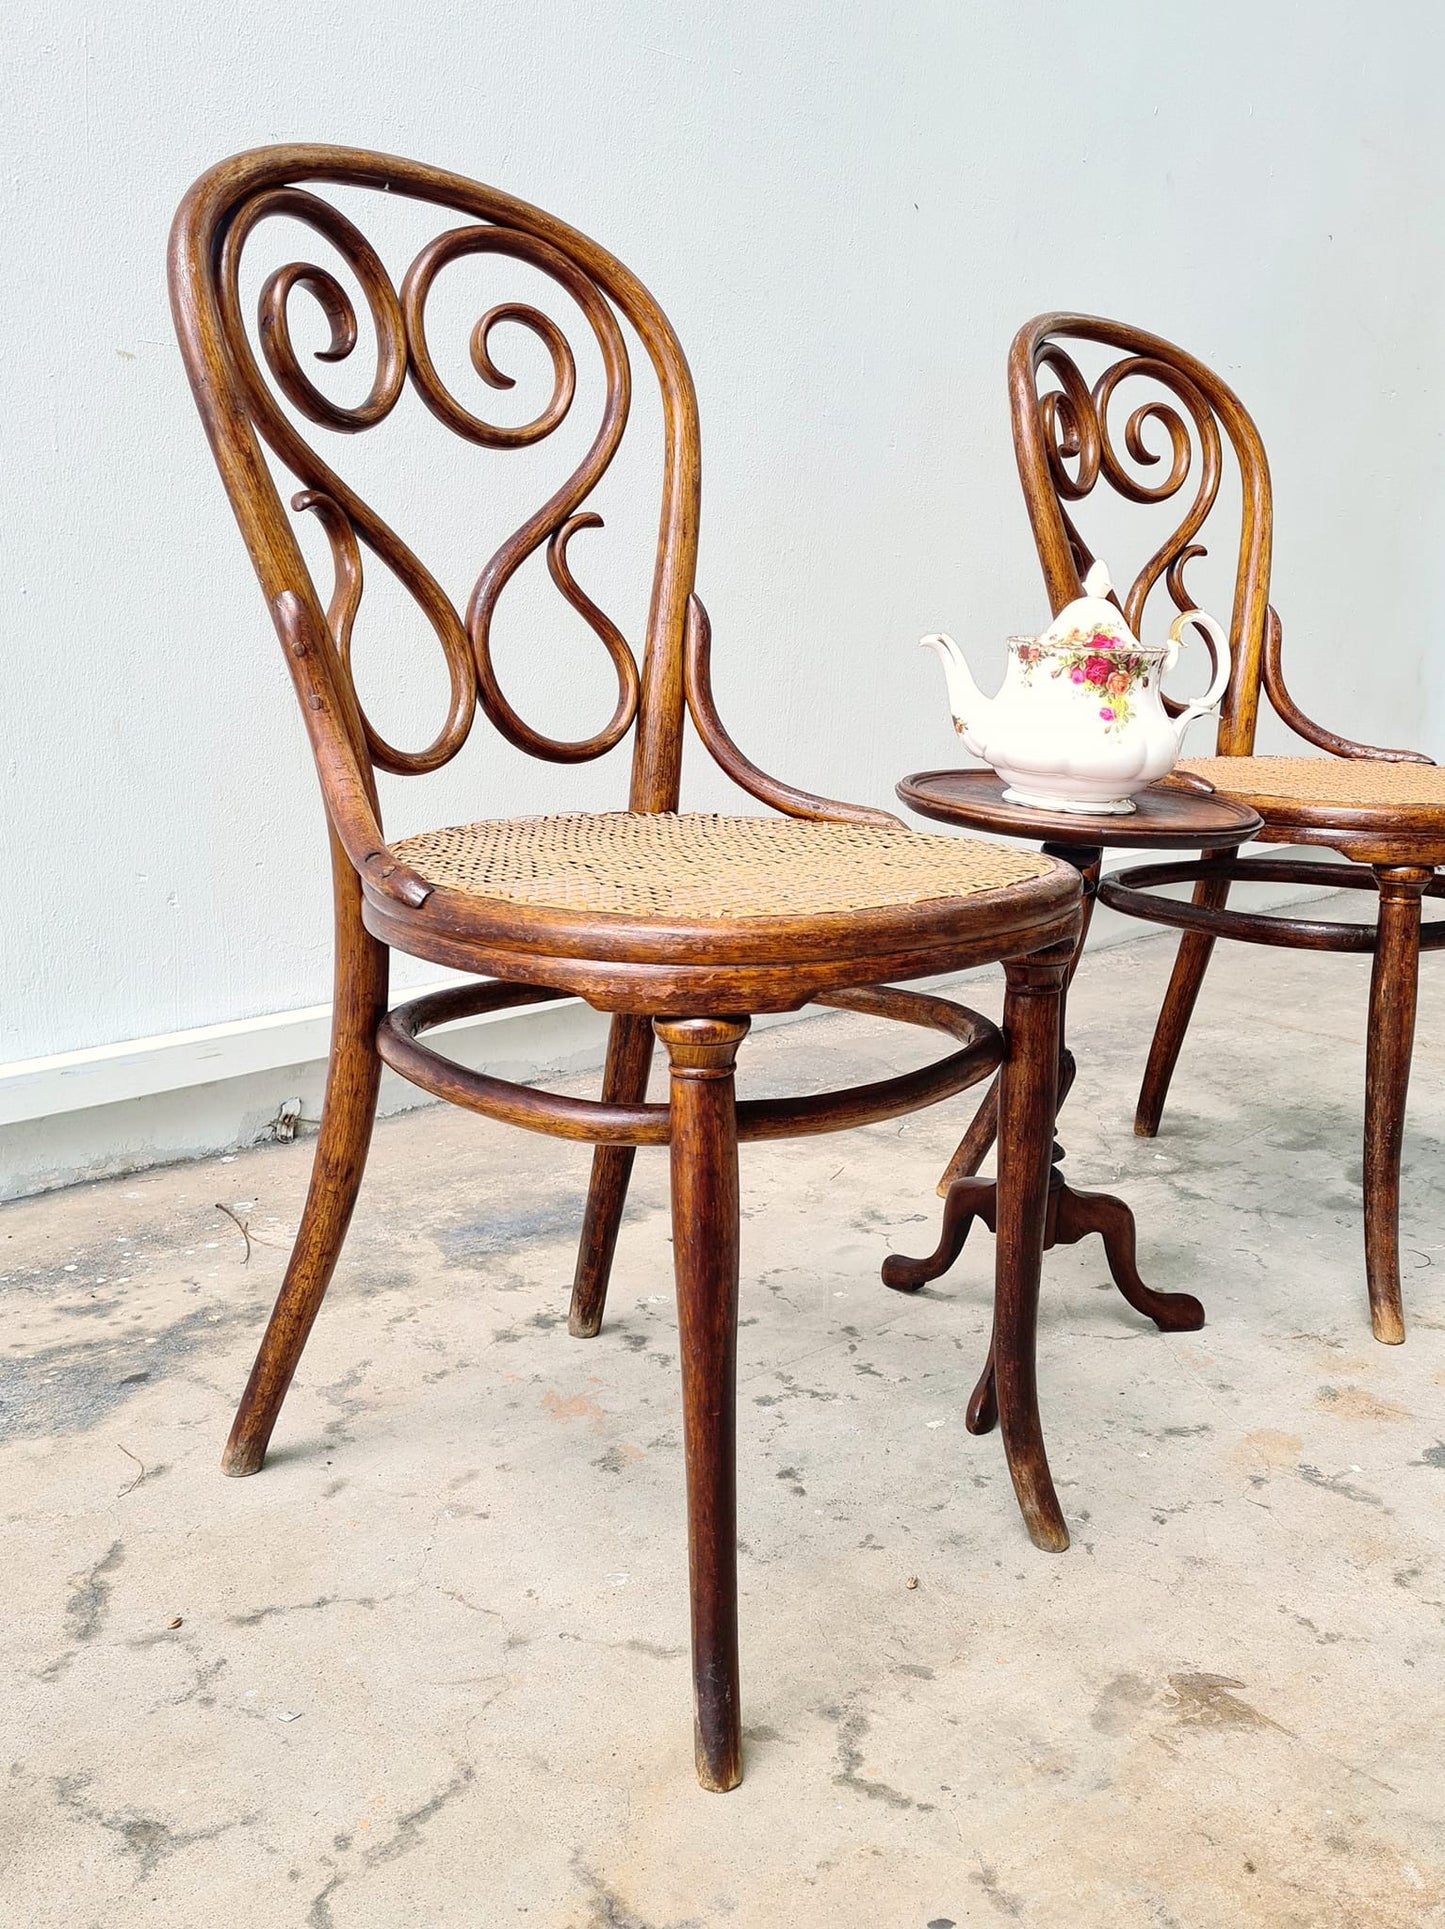 A pair of Original Thornet bent wood chair from England 